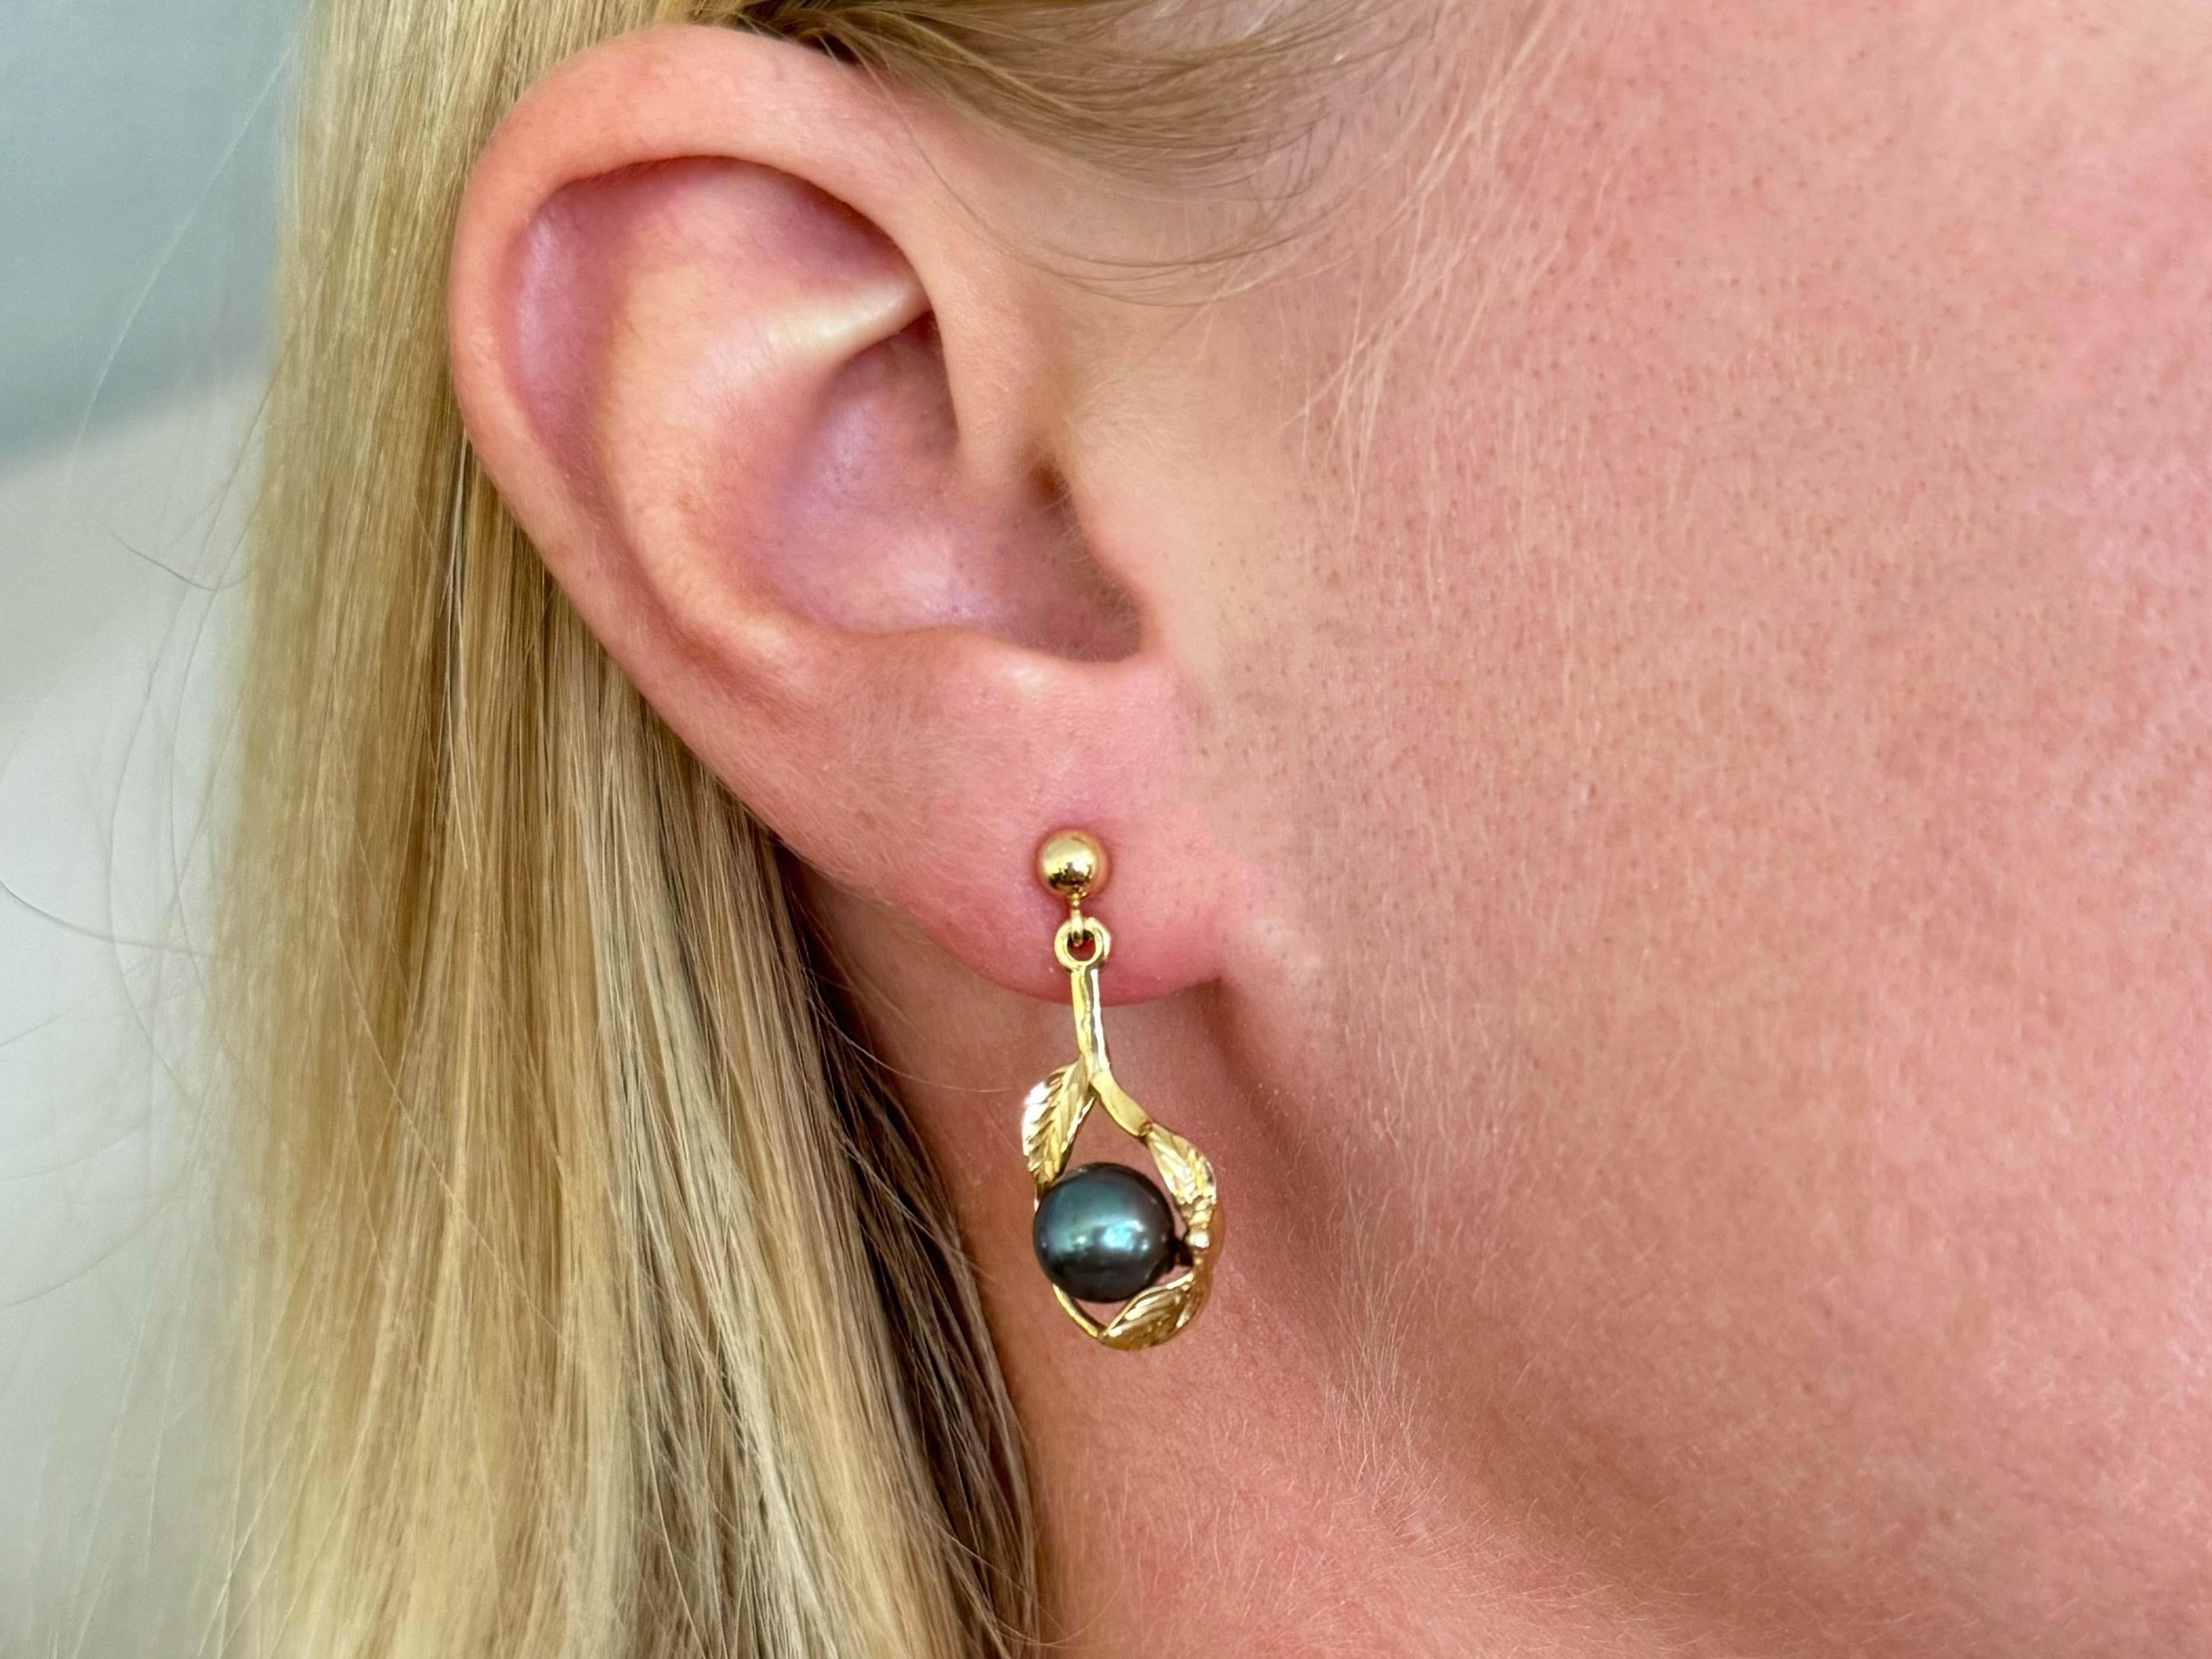 These stunning Tahitian pearls feature a peacock color with stunning blue green hues.

Earrings Specifications:

Metal: 14k Yellow Gold

Earring Diameter: 1.00